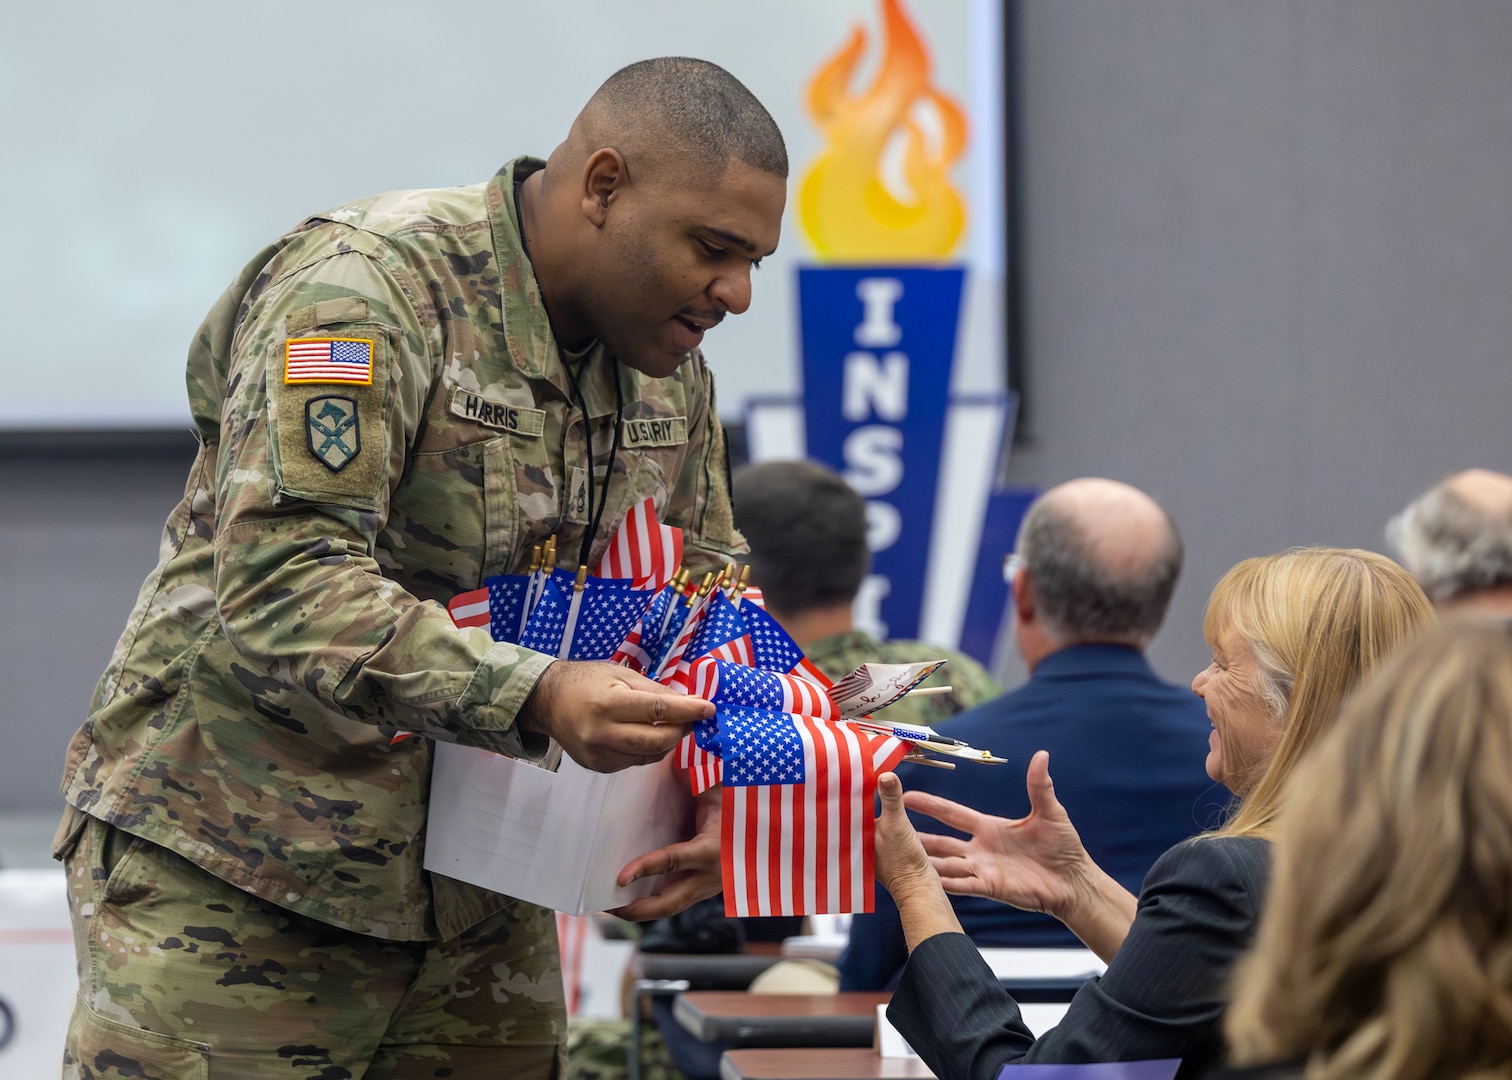 Sergeant First Class Johnny Alphonso Harris, Naval Surface Warfare Center Panama City Division Equal Employment Opportunity and Diversity & Inclusion (ED&I) specialist, hands out American flags to INSPIRE 2.0 attendees, Nov. 14. The event began by recognizing the civilian workforce who actively serve in the military, is a military veteran, is a family member of a military member or those who took the oath of federal service who support this country and its servicemembers. (U.S. Navy photo by Eddie Green)